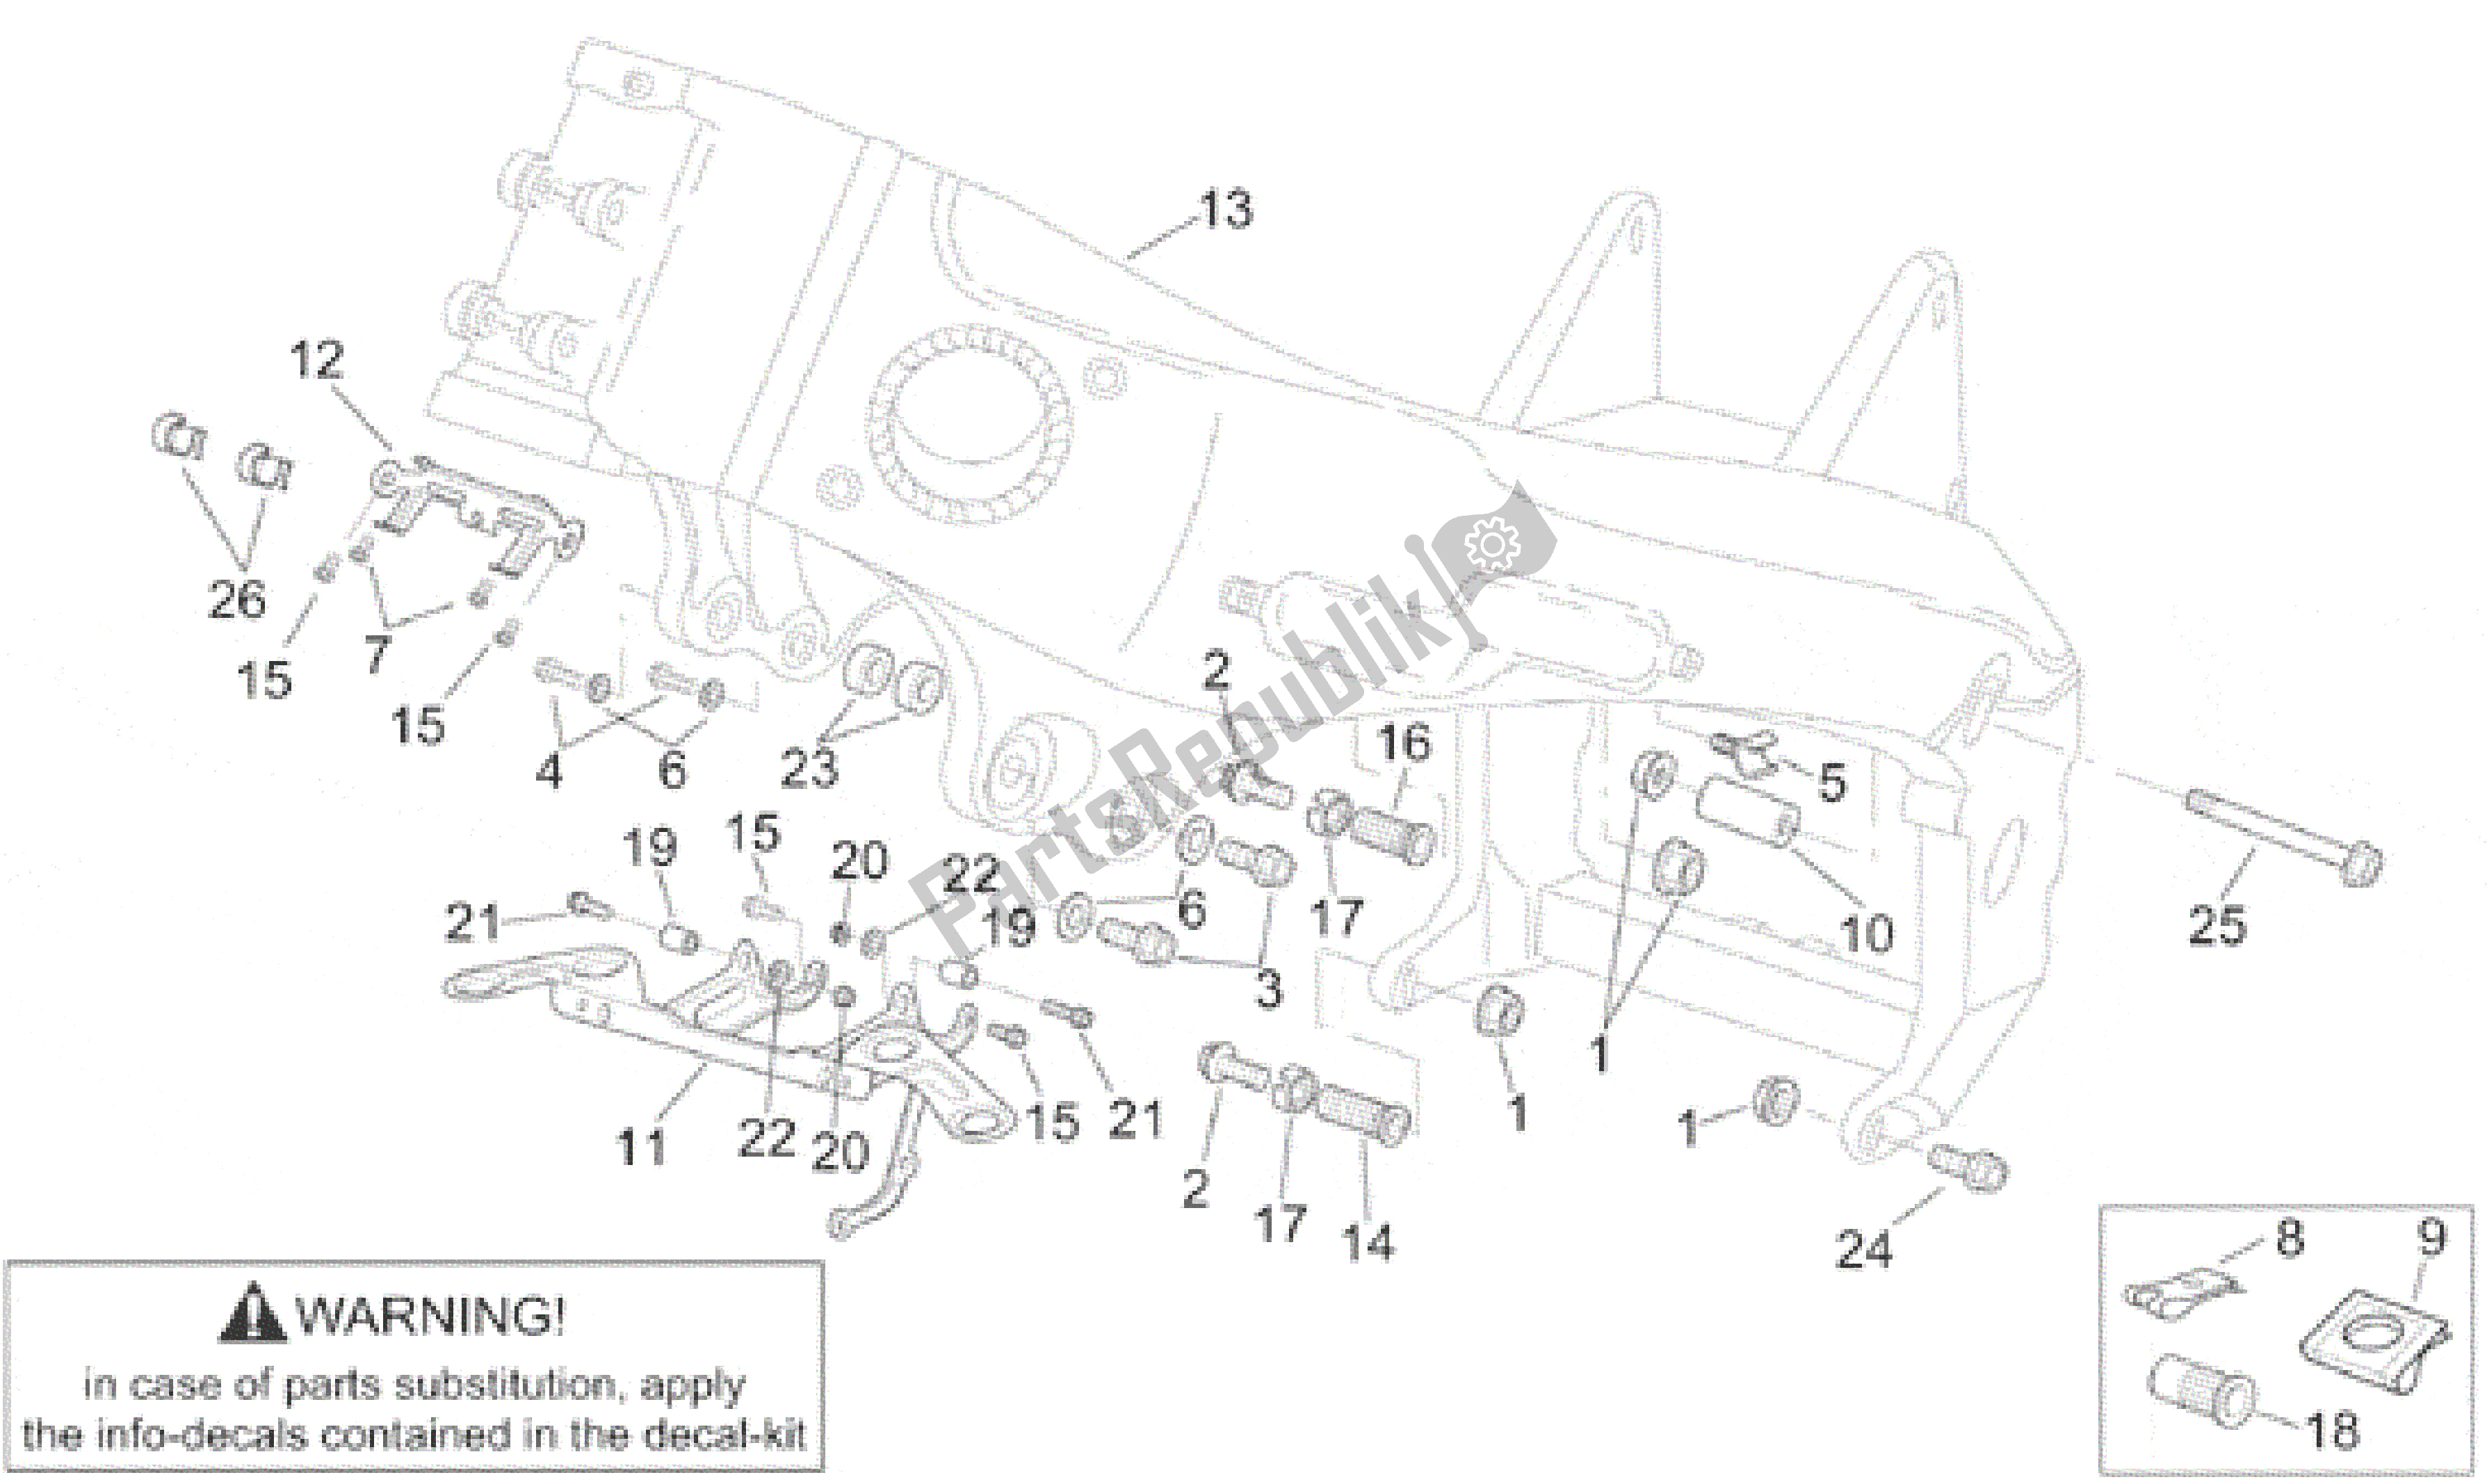 All parts for the Frame Iii of the Aprilia RSV Mille 3901 1000 2001 - 2002